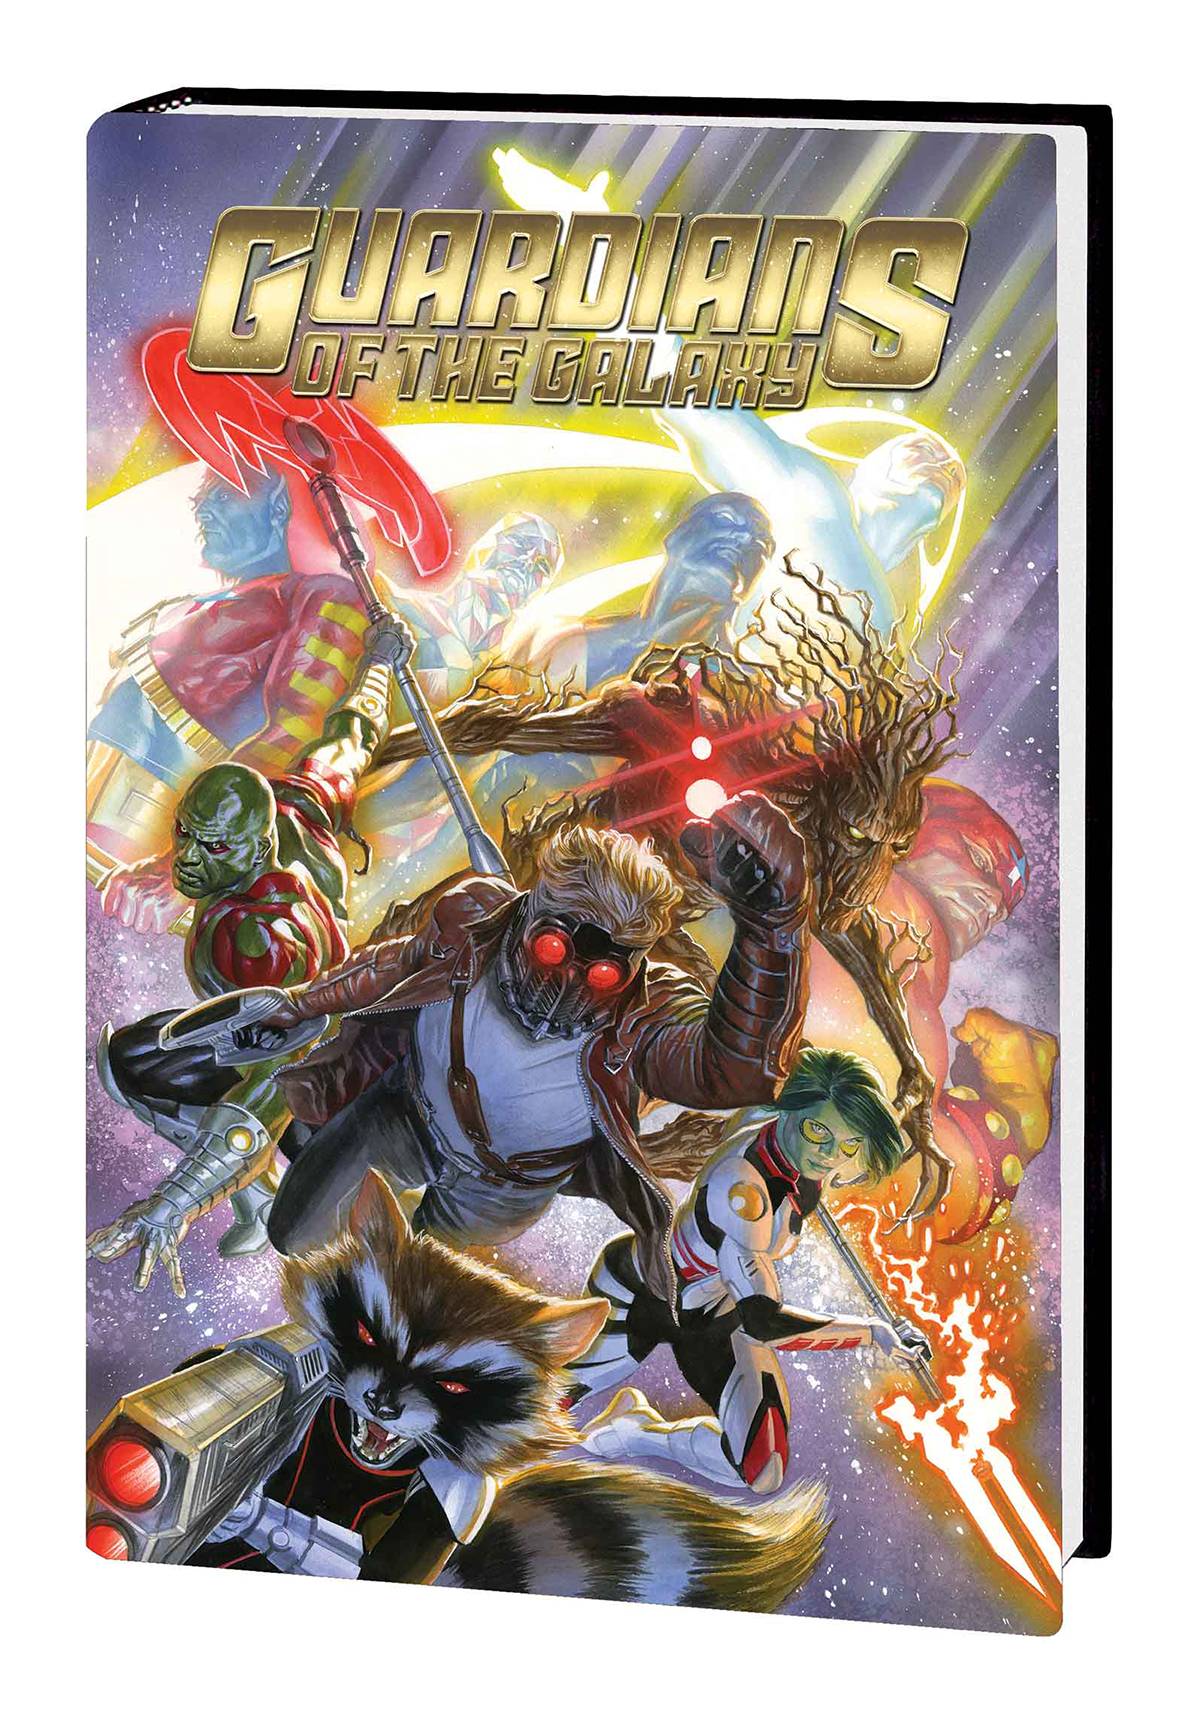 Guardians of Galaxy Hardcover Volume 3